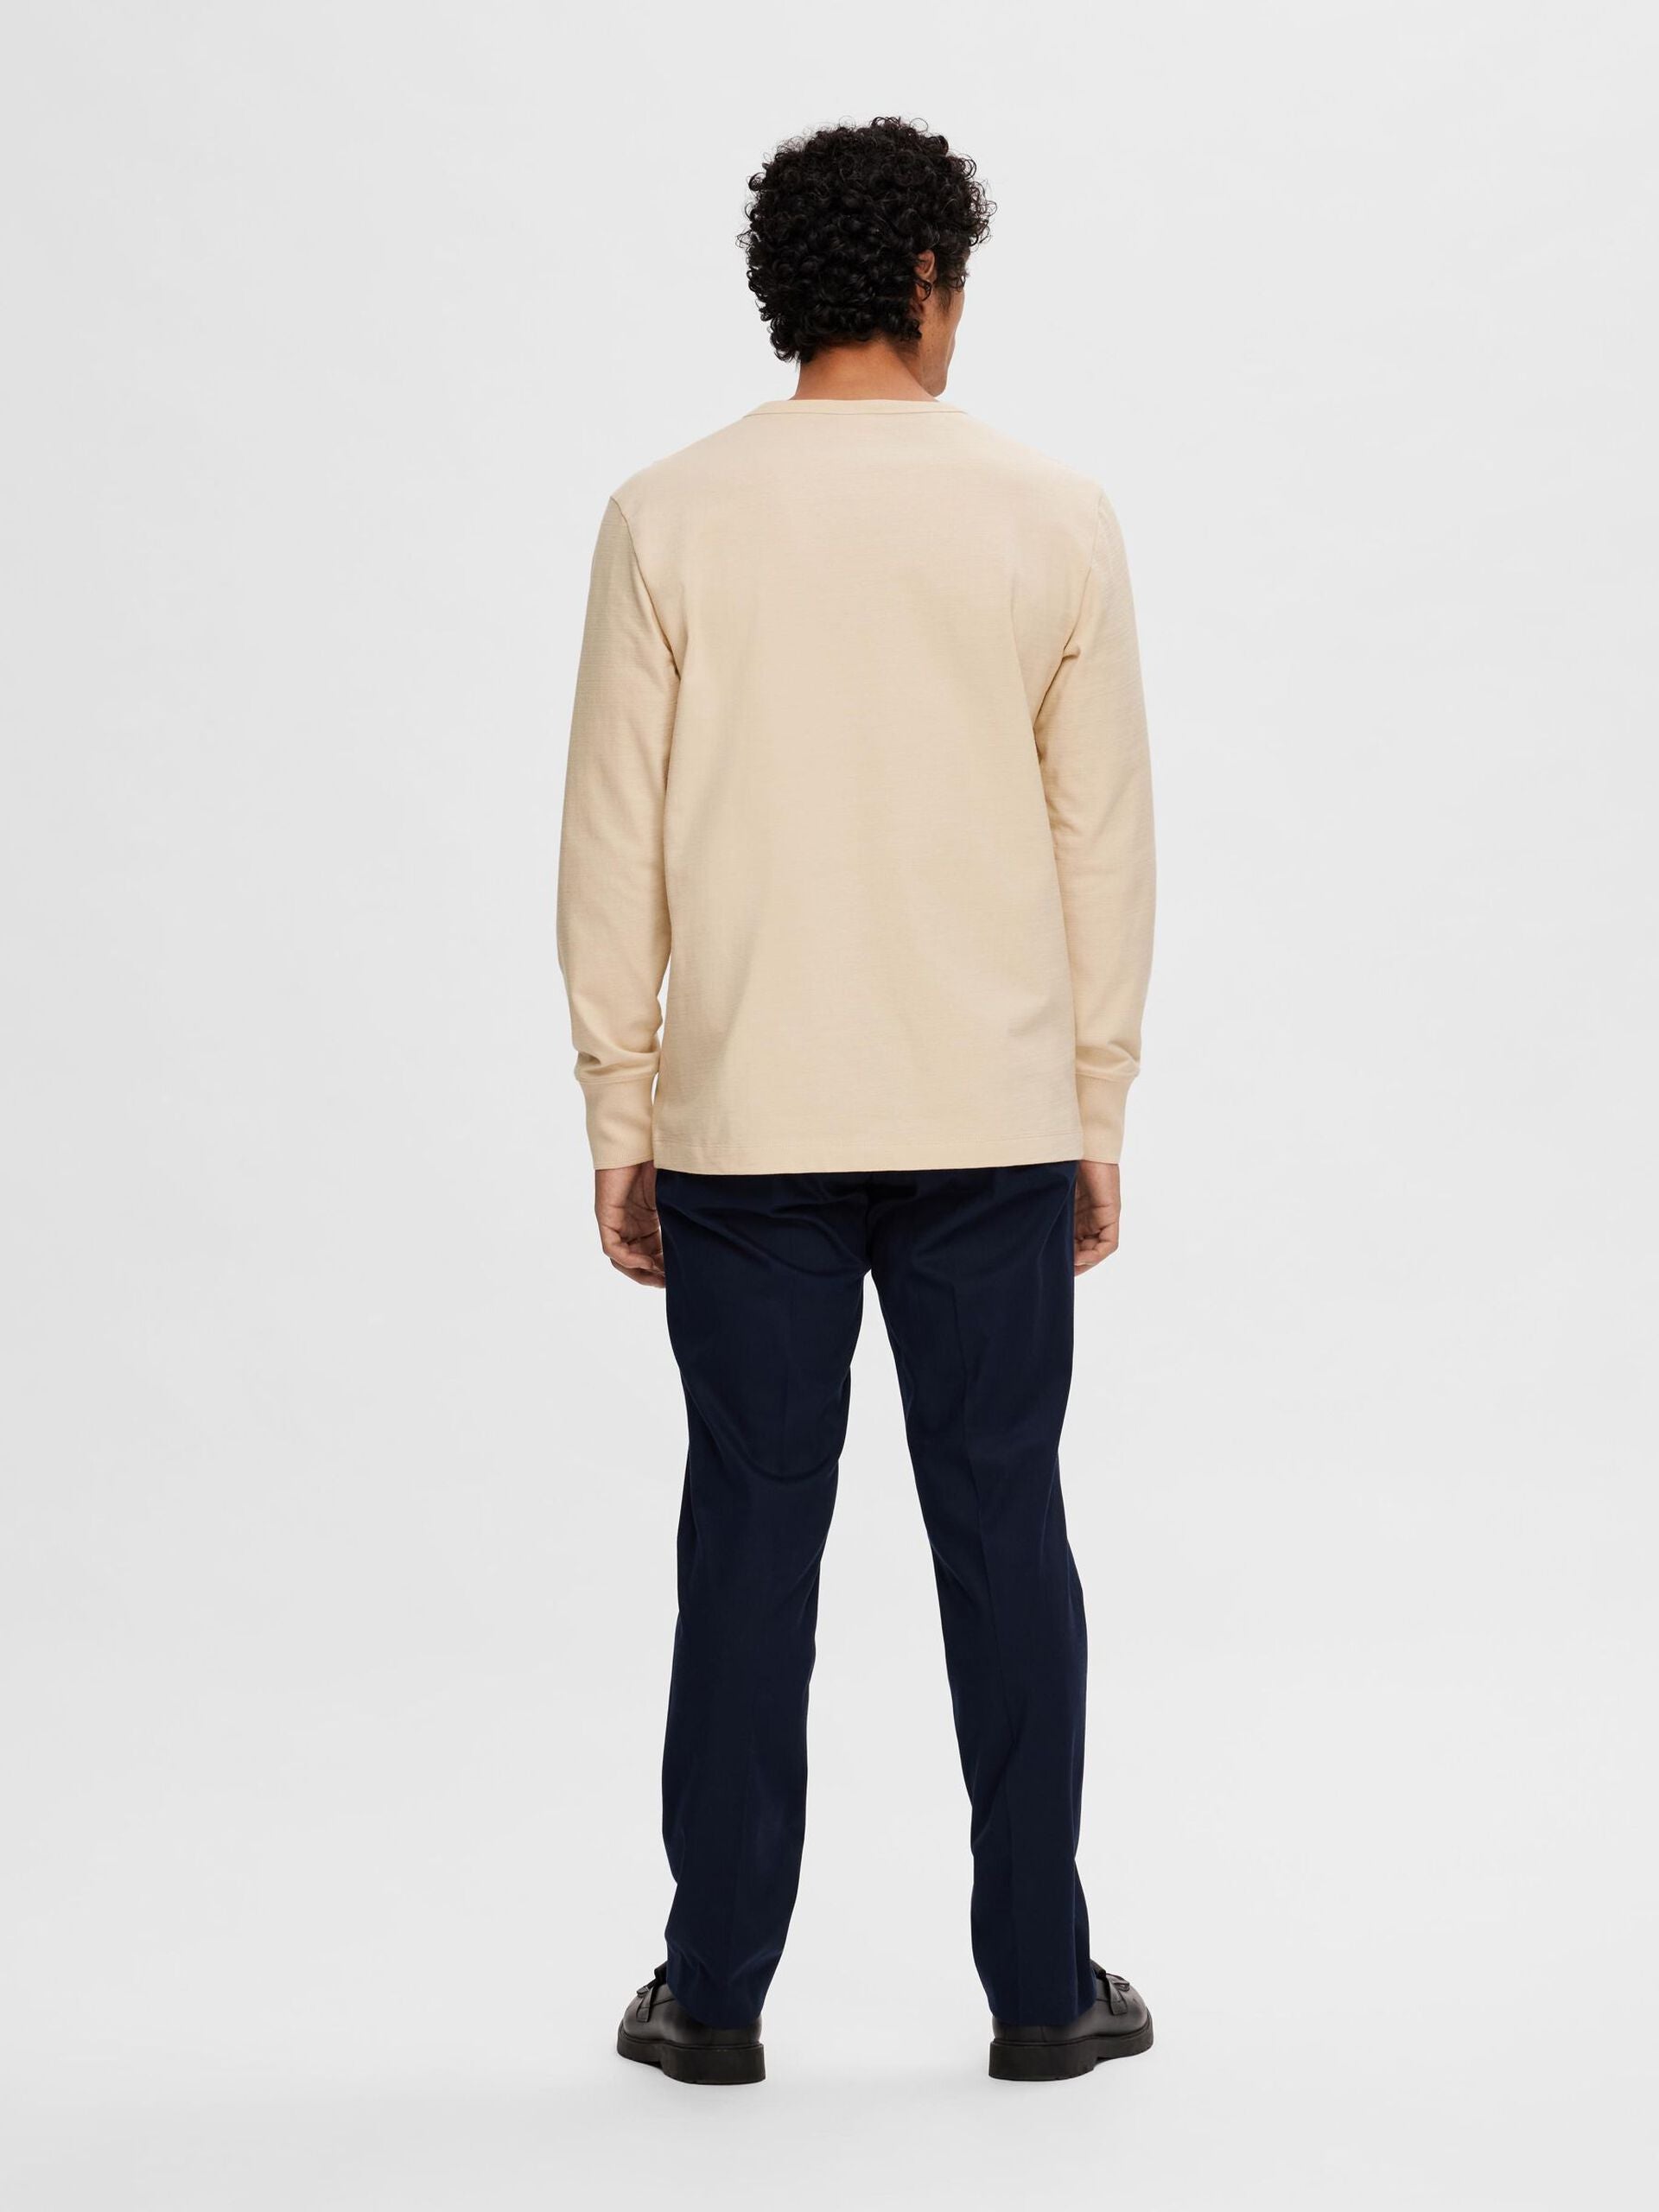 SELECTED | LANGÄRMELIGES HENLEY T-SHIRT| OATMEAL